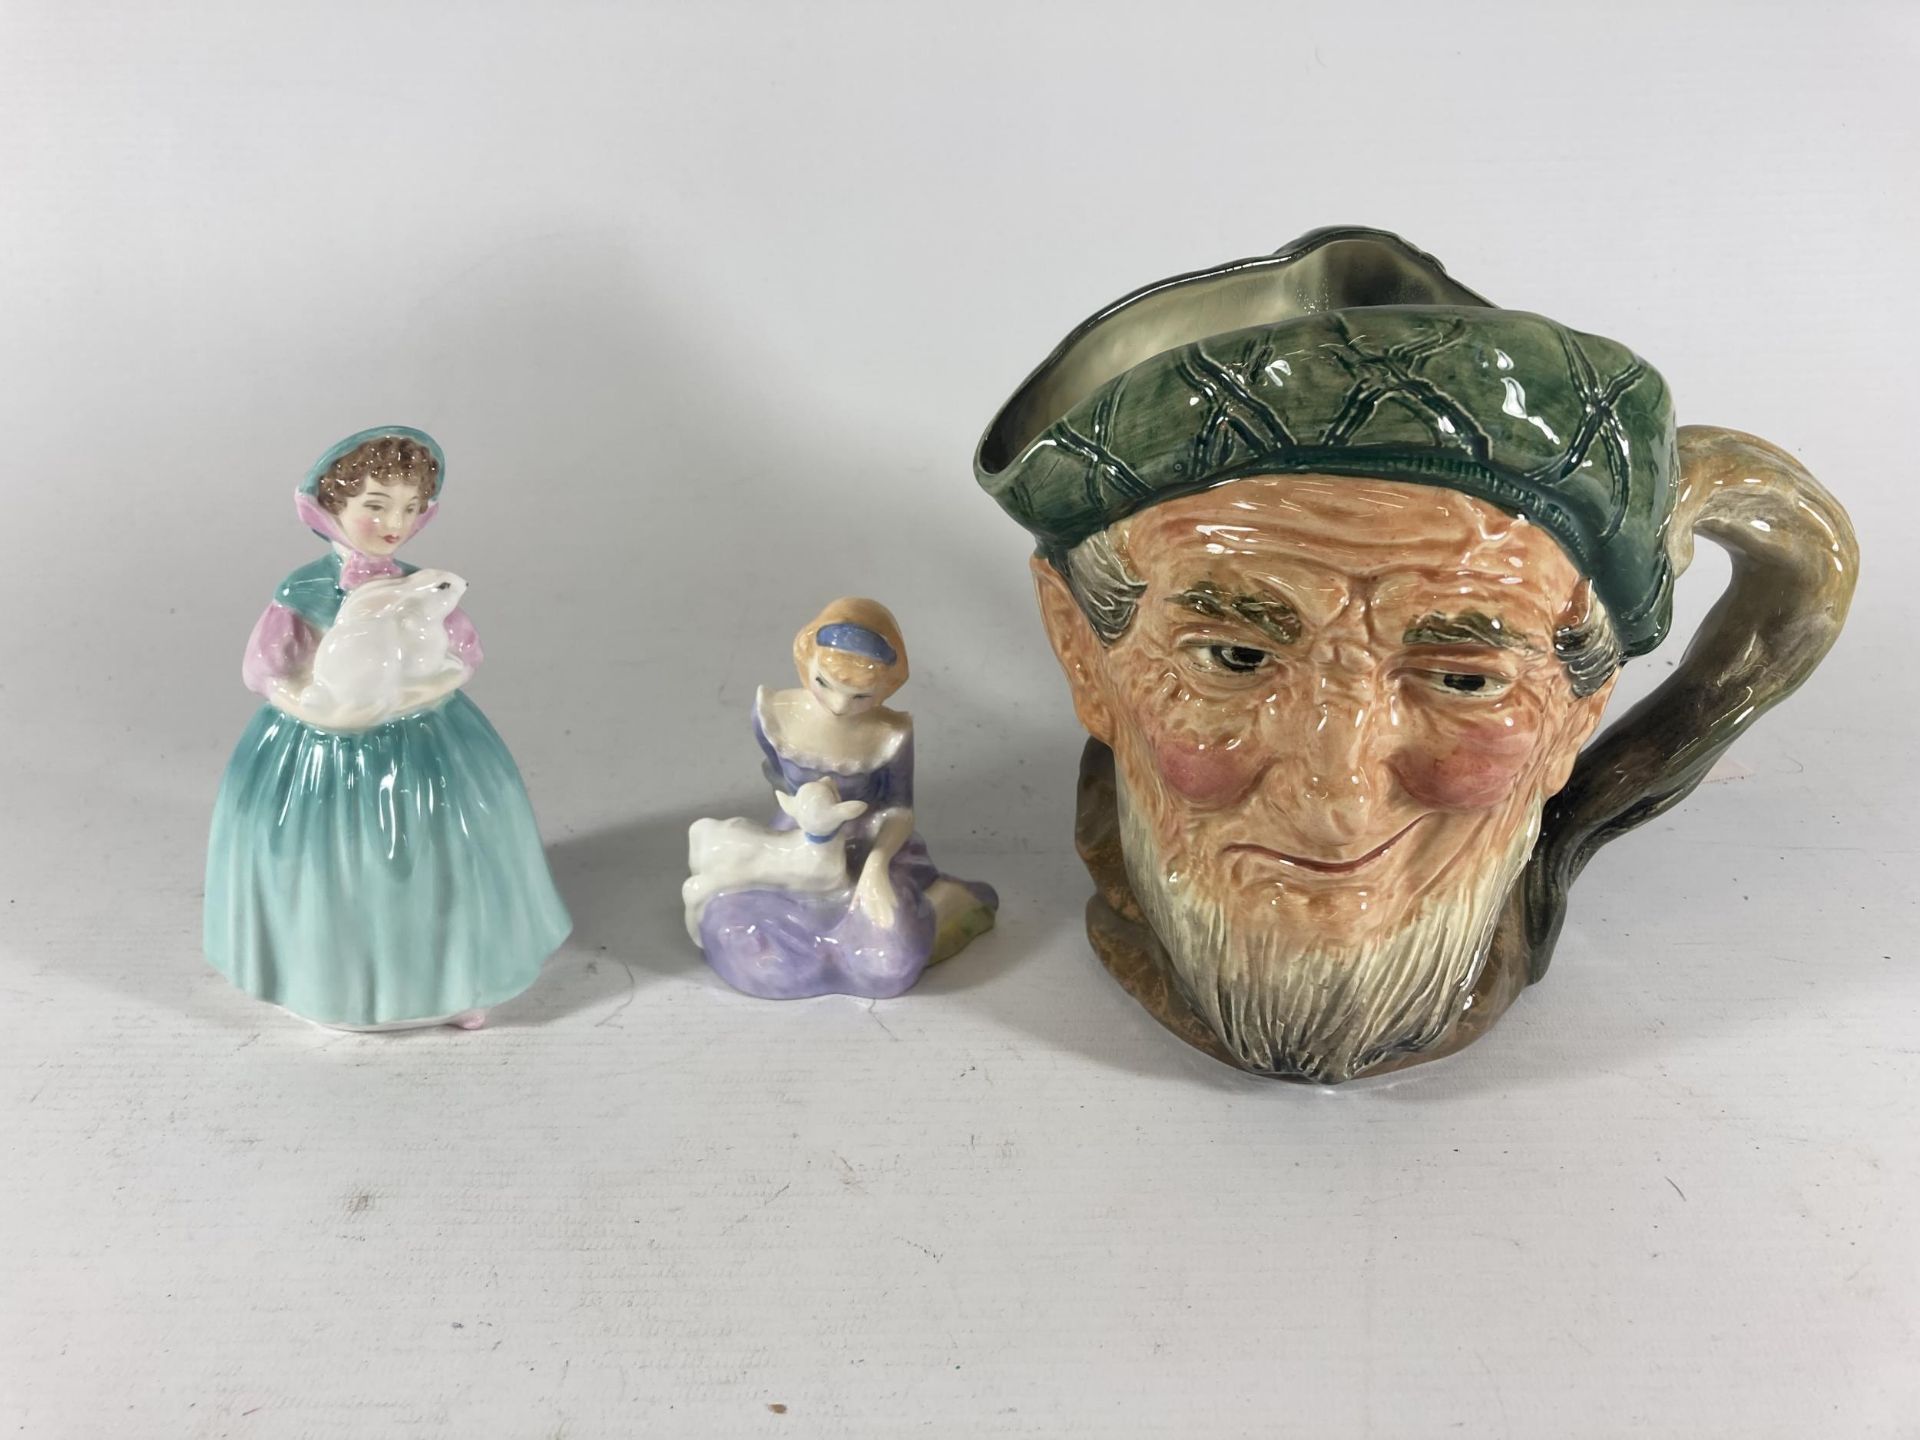 THREE CERAMICS TO INCLUDE A TOBY JUG "OWD MAC" AND TWO ROYAL DOULTON FIGURINES "BUNNY" AND "MARY HAD